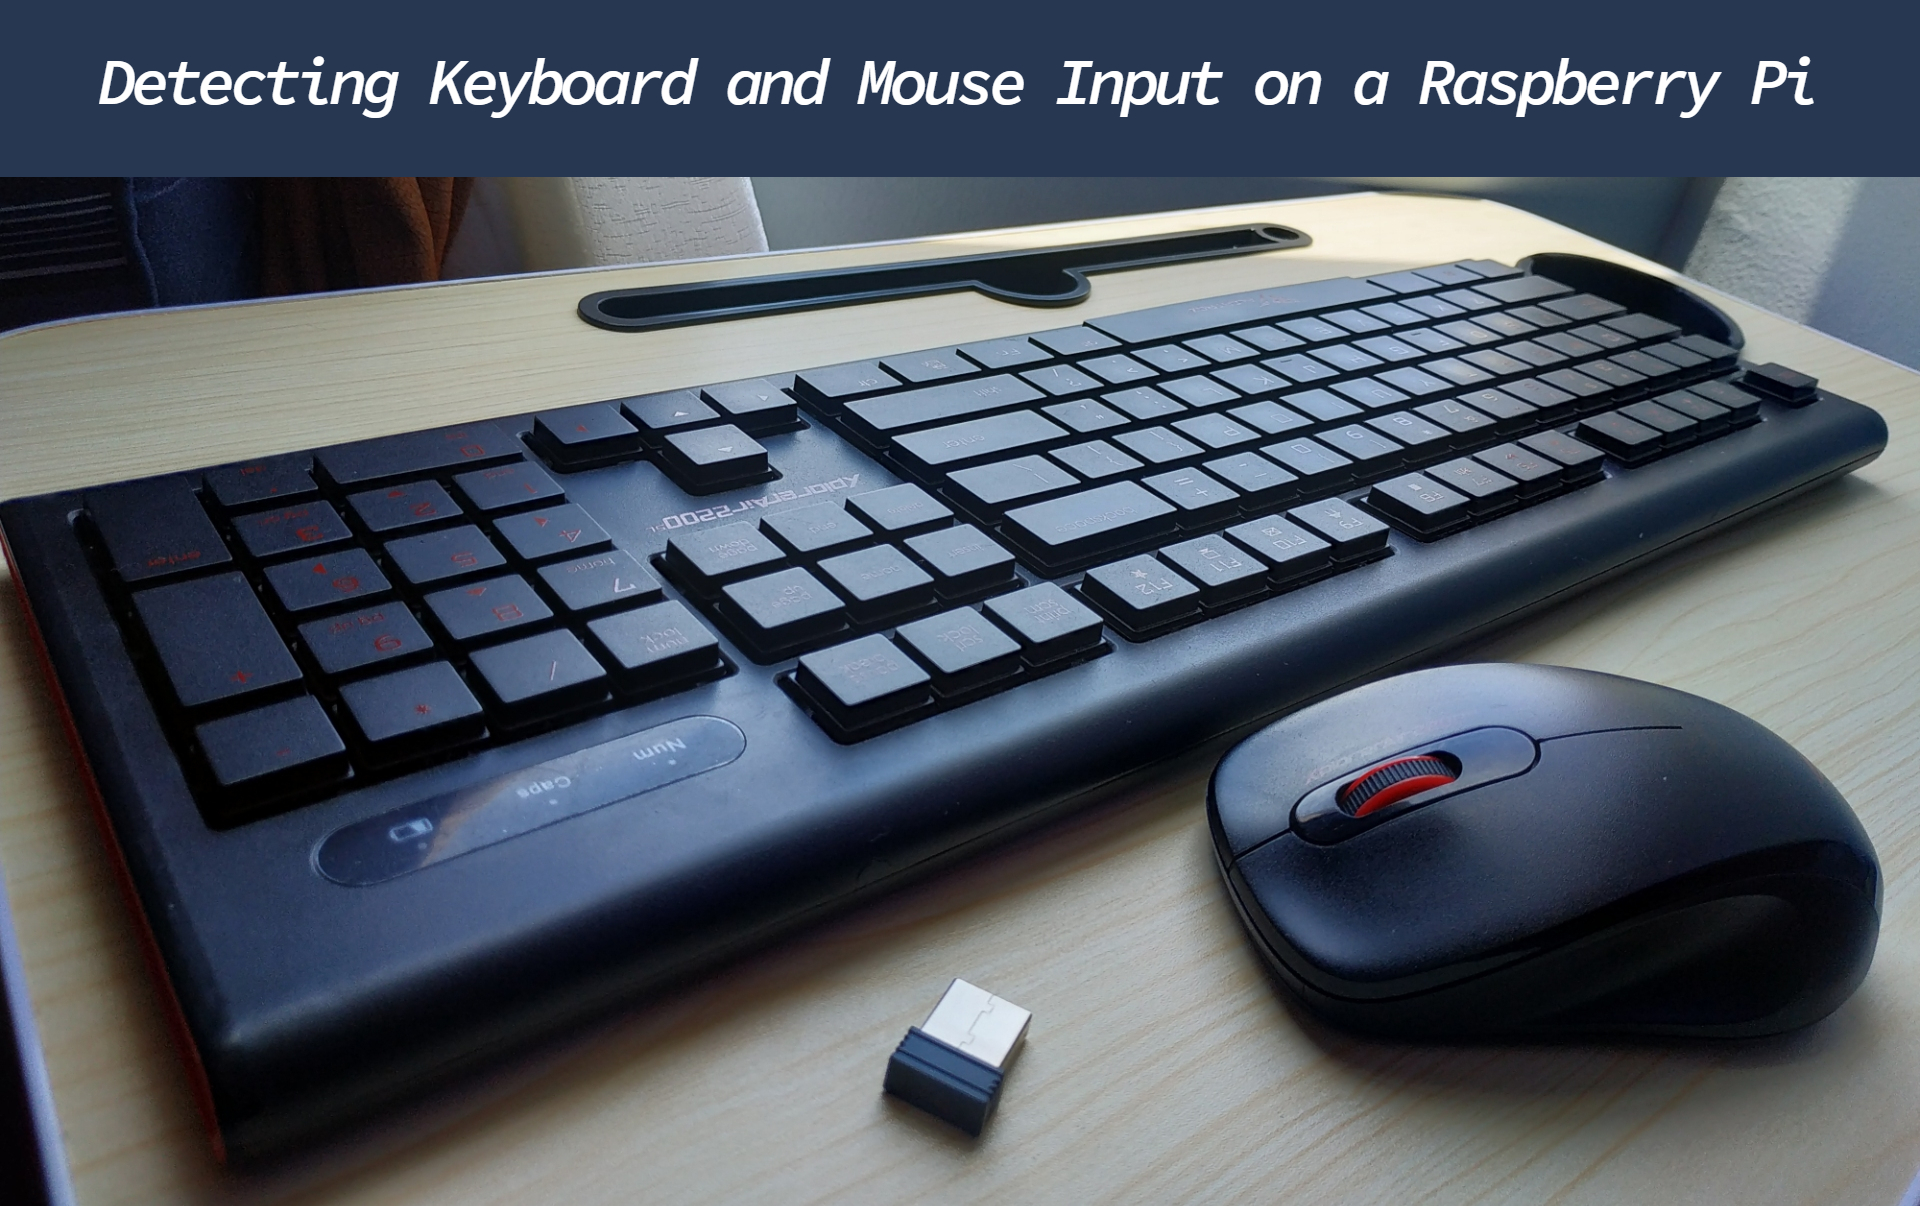 How To Detect Keyboard and Mouse Inputs With a Raspberry Pi